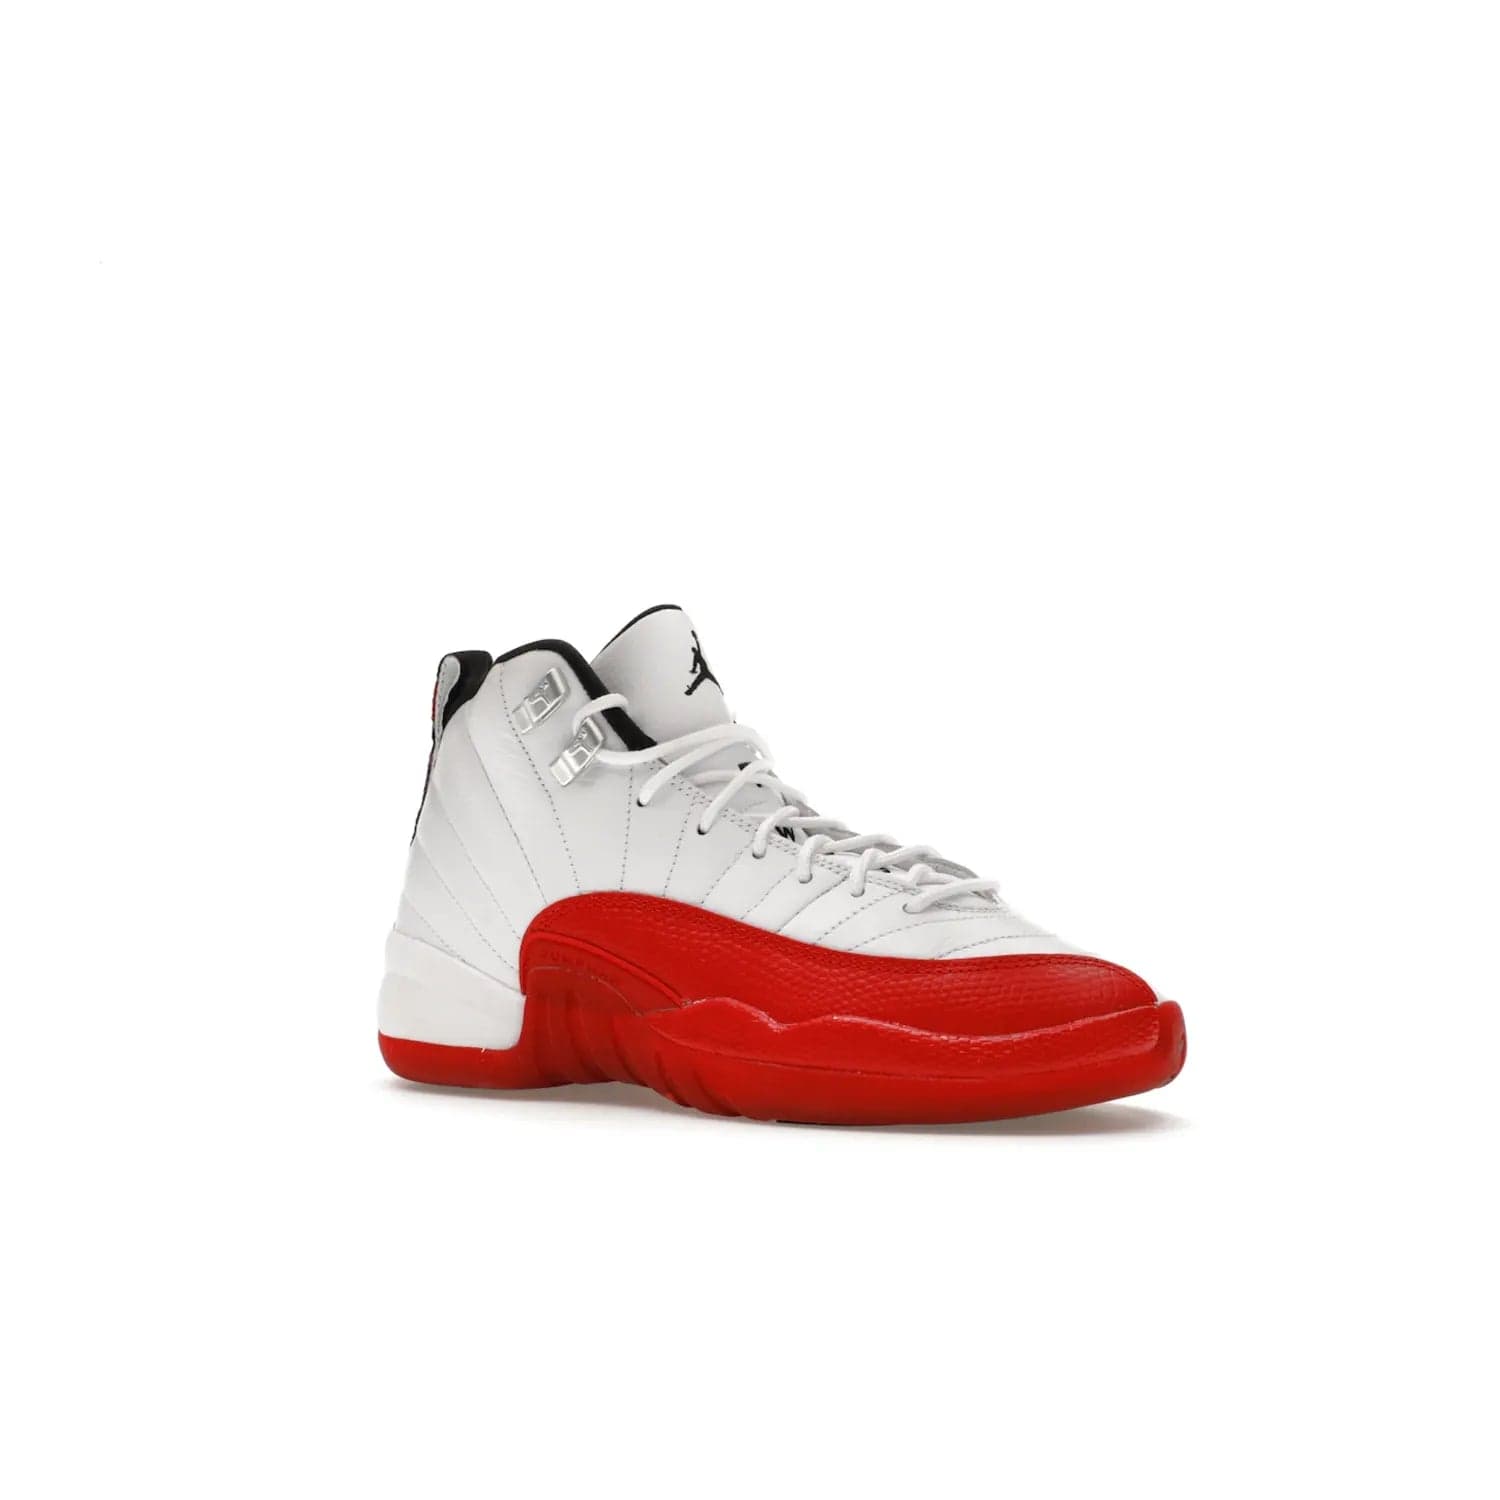 Jordan 12 Retro Cherry (2023) (GS) - Image 4 - Only at www.BallersClubKickz.com - Grab the Jordan 12 Retro Cherry (2023) (GS) and show off your signature style with these iconic kicks. Dressed in White, Black and Varsity Red, these timeless kicks are sure to turn heads. Available October 28, 2023.